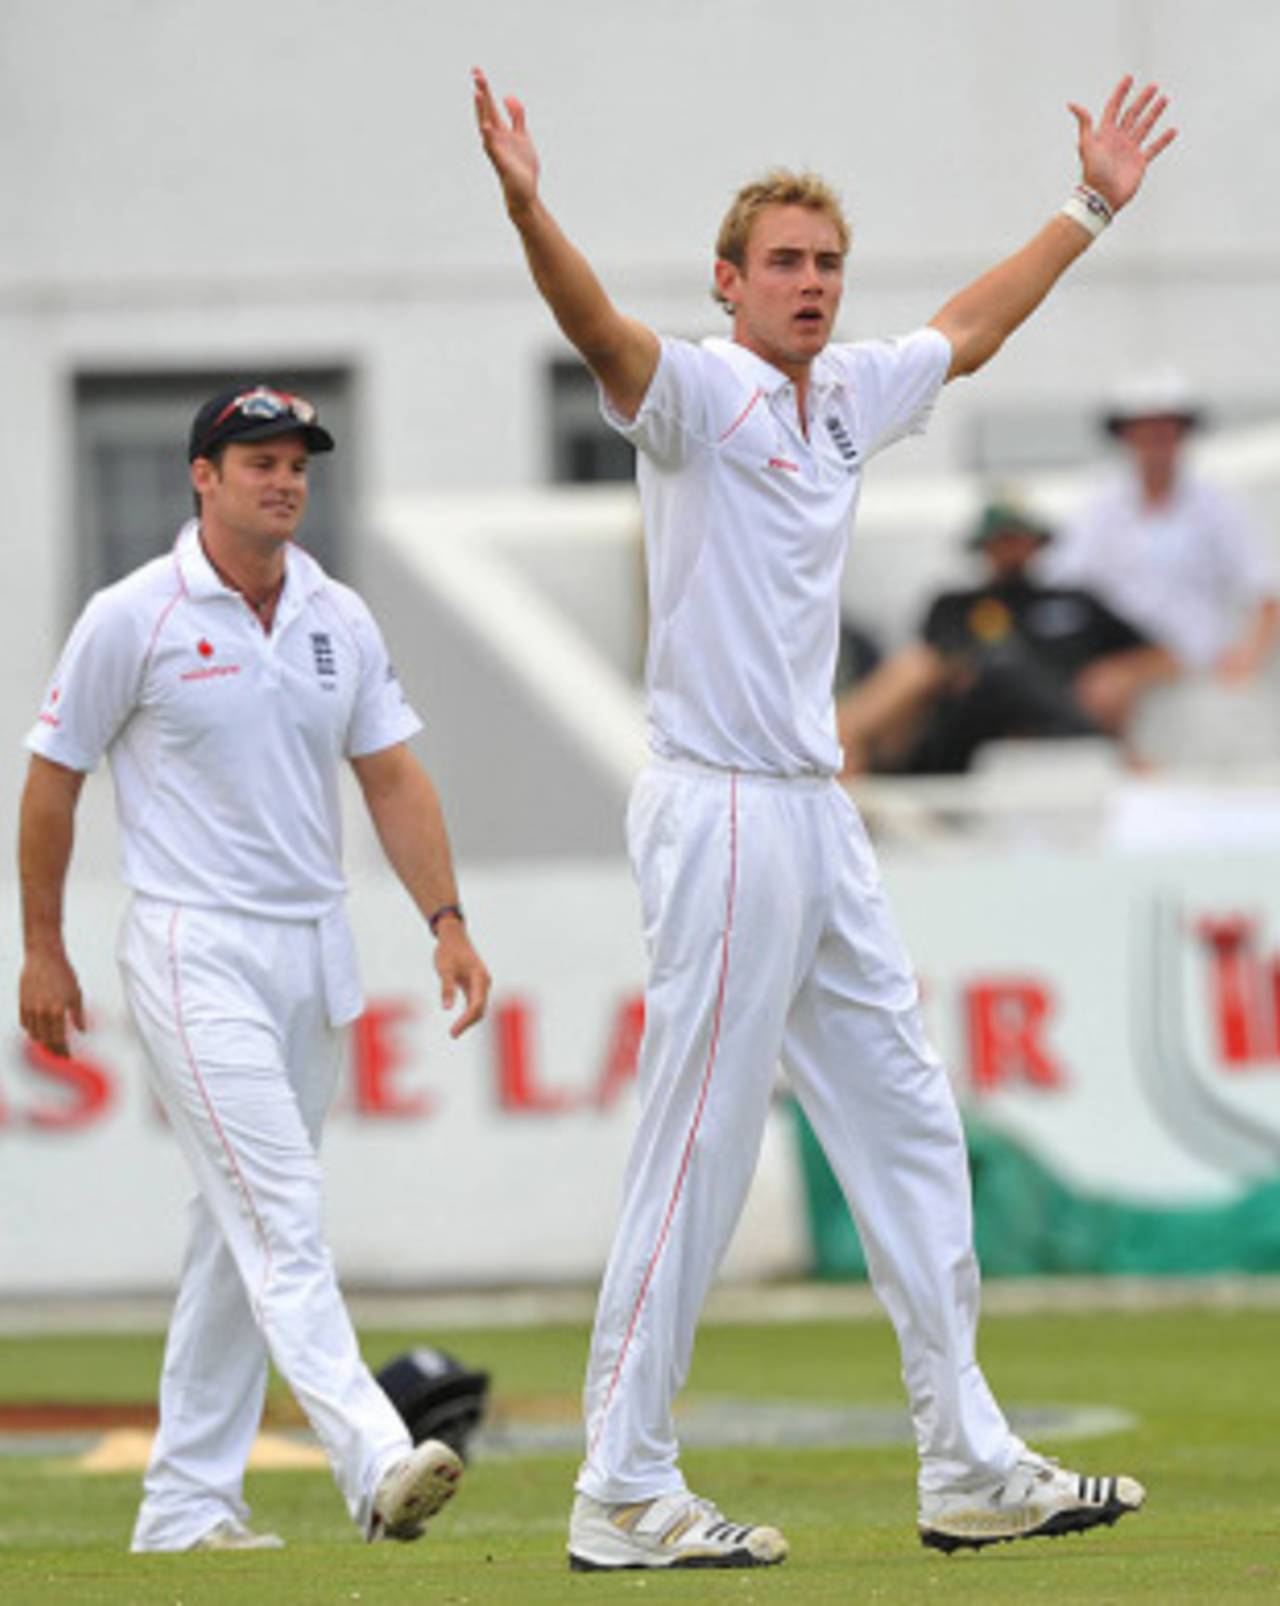 Stuart Broad is not impressed as an appeal for caught-behind against Hashim Amla is turned down, South Africa v England, 3rd Test, Cape Town, January 3, 2010